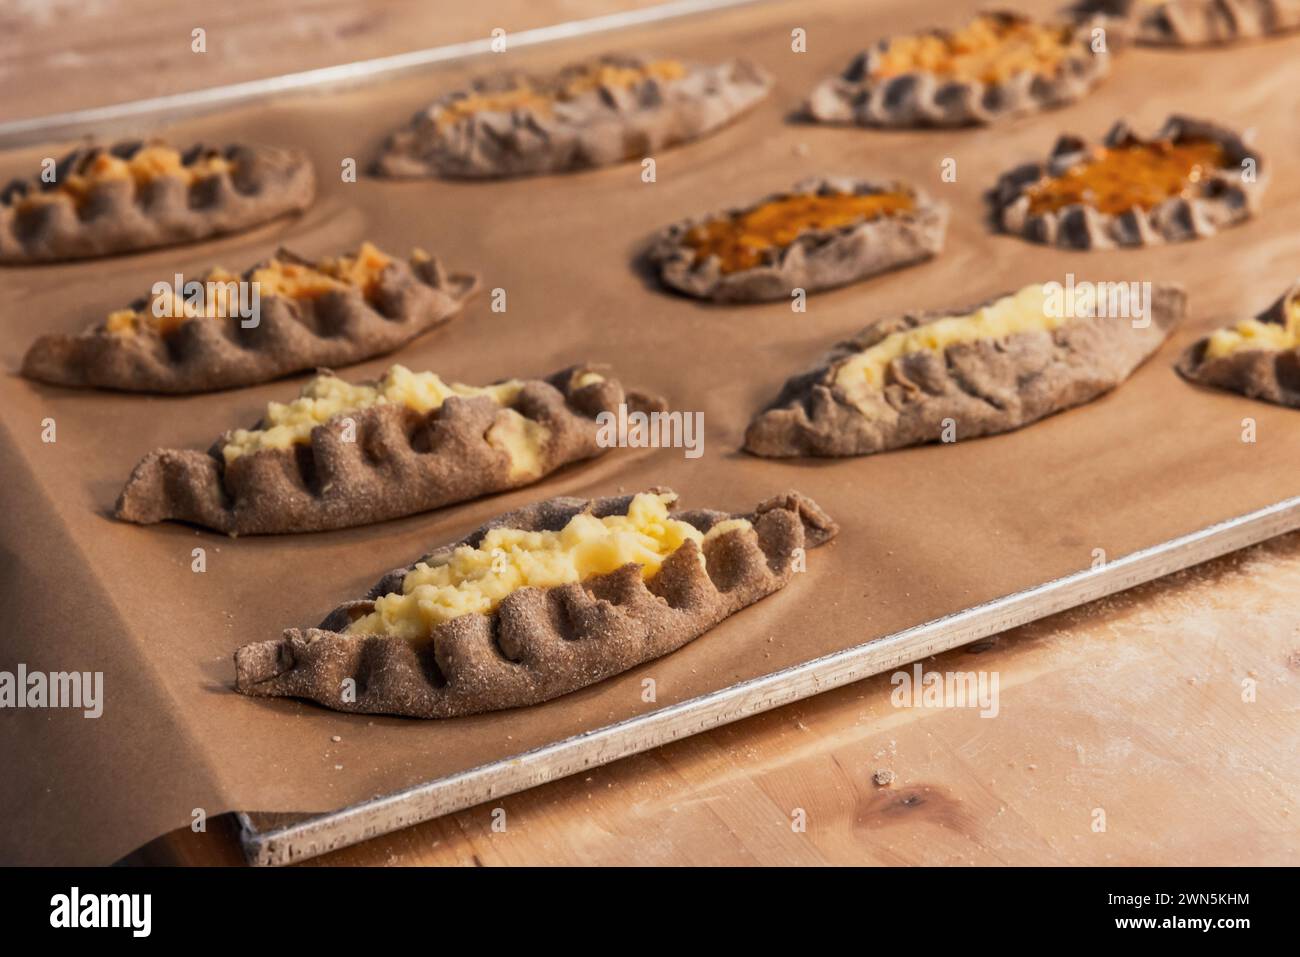 Karelian pasties with mashed potato and carrot filling just after backing, close-up photo with selective soft focus Stock Photo